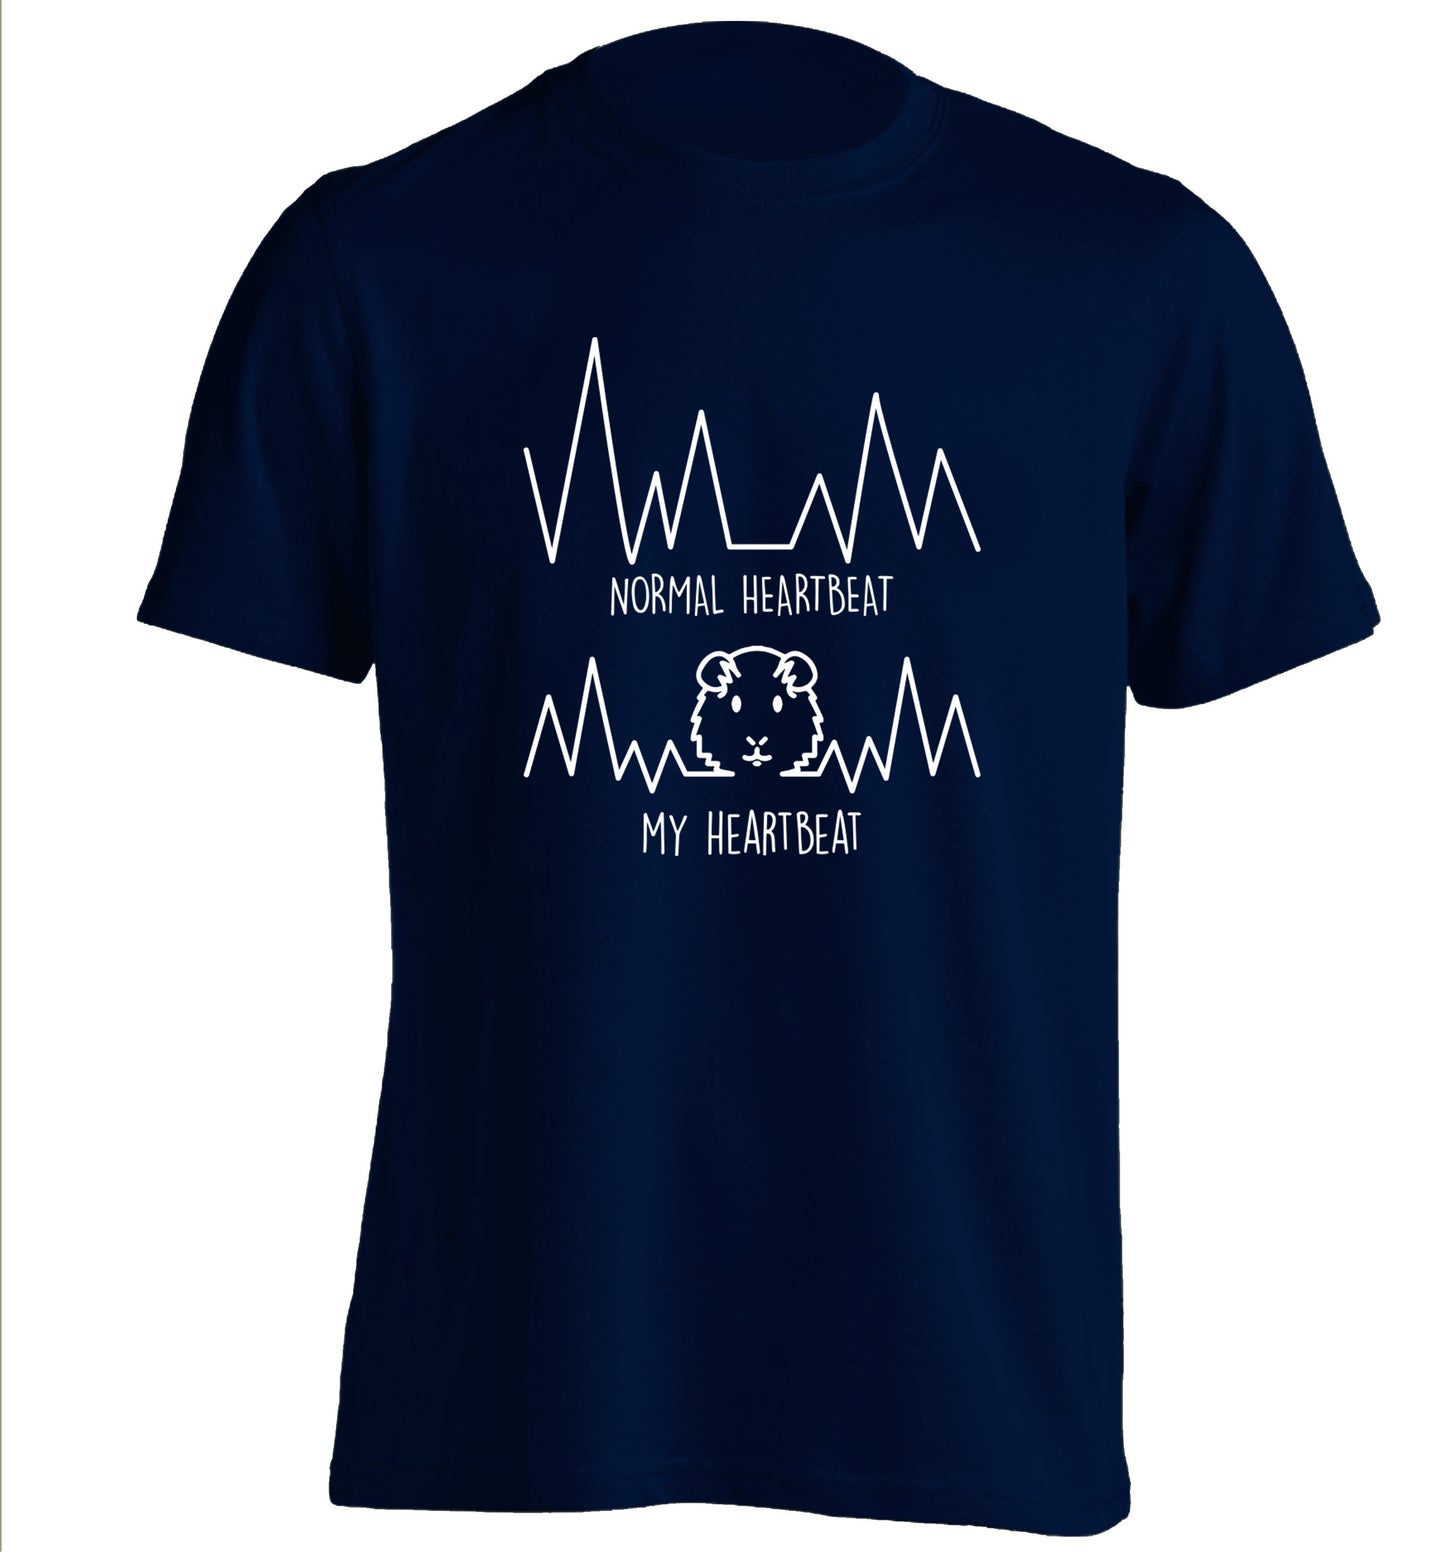 Normal heartbeat vs my heartbeat guinea pig lover adults unisex navy Tshirt 2XL